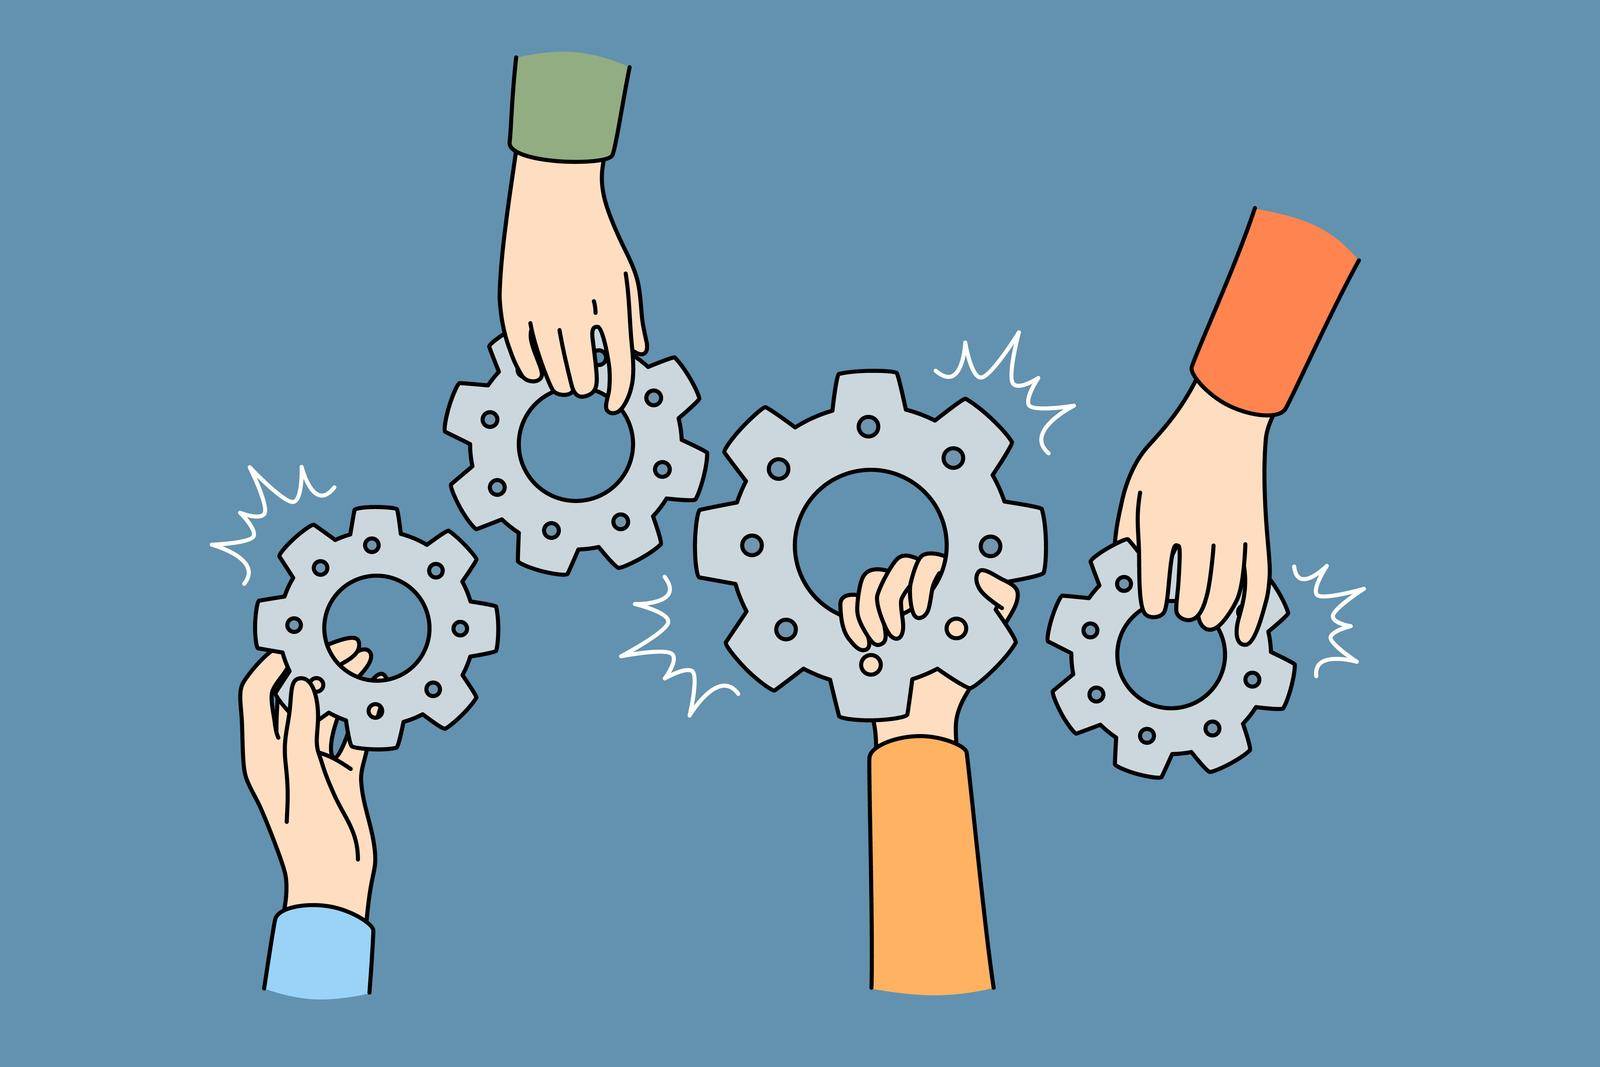 Teamwork collaboration and unity concept. Human hands of business partners holding gears as symbol of cooperation vector illustration